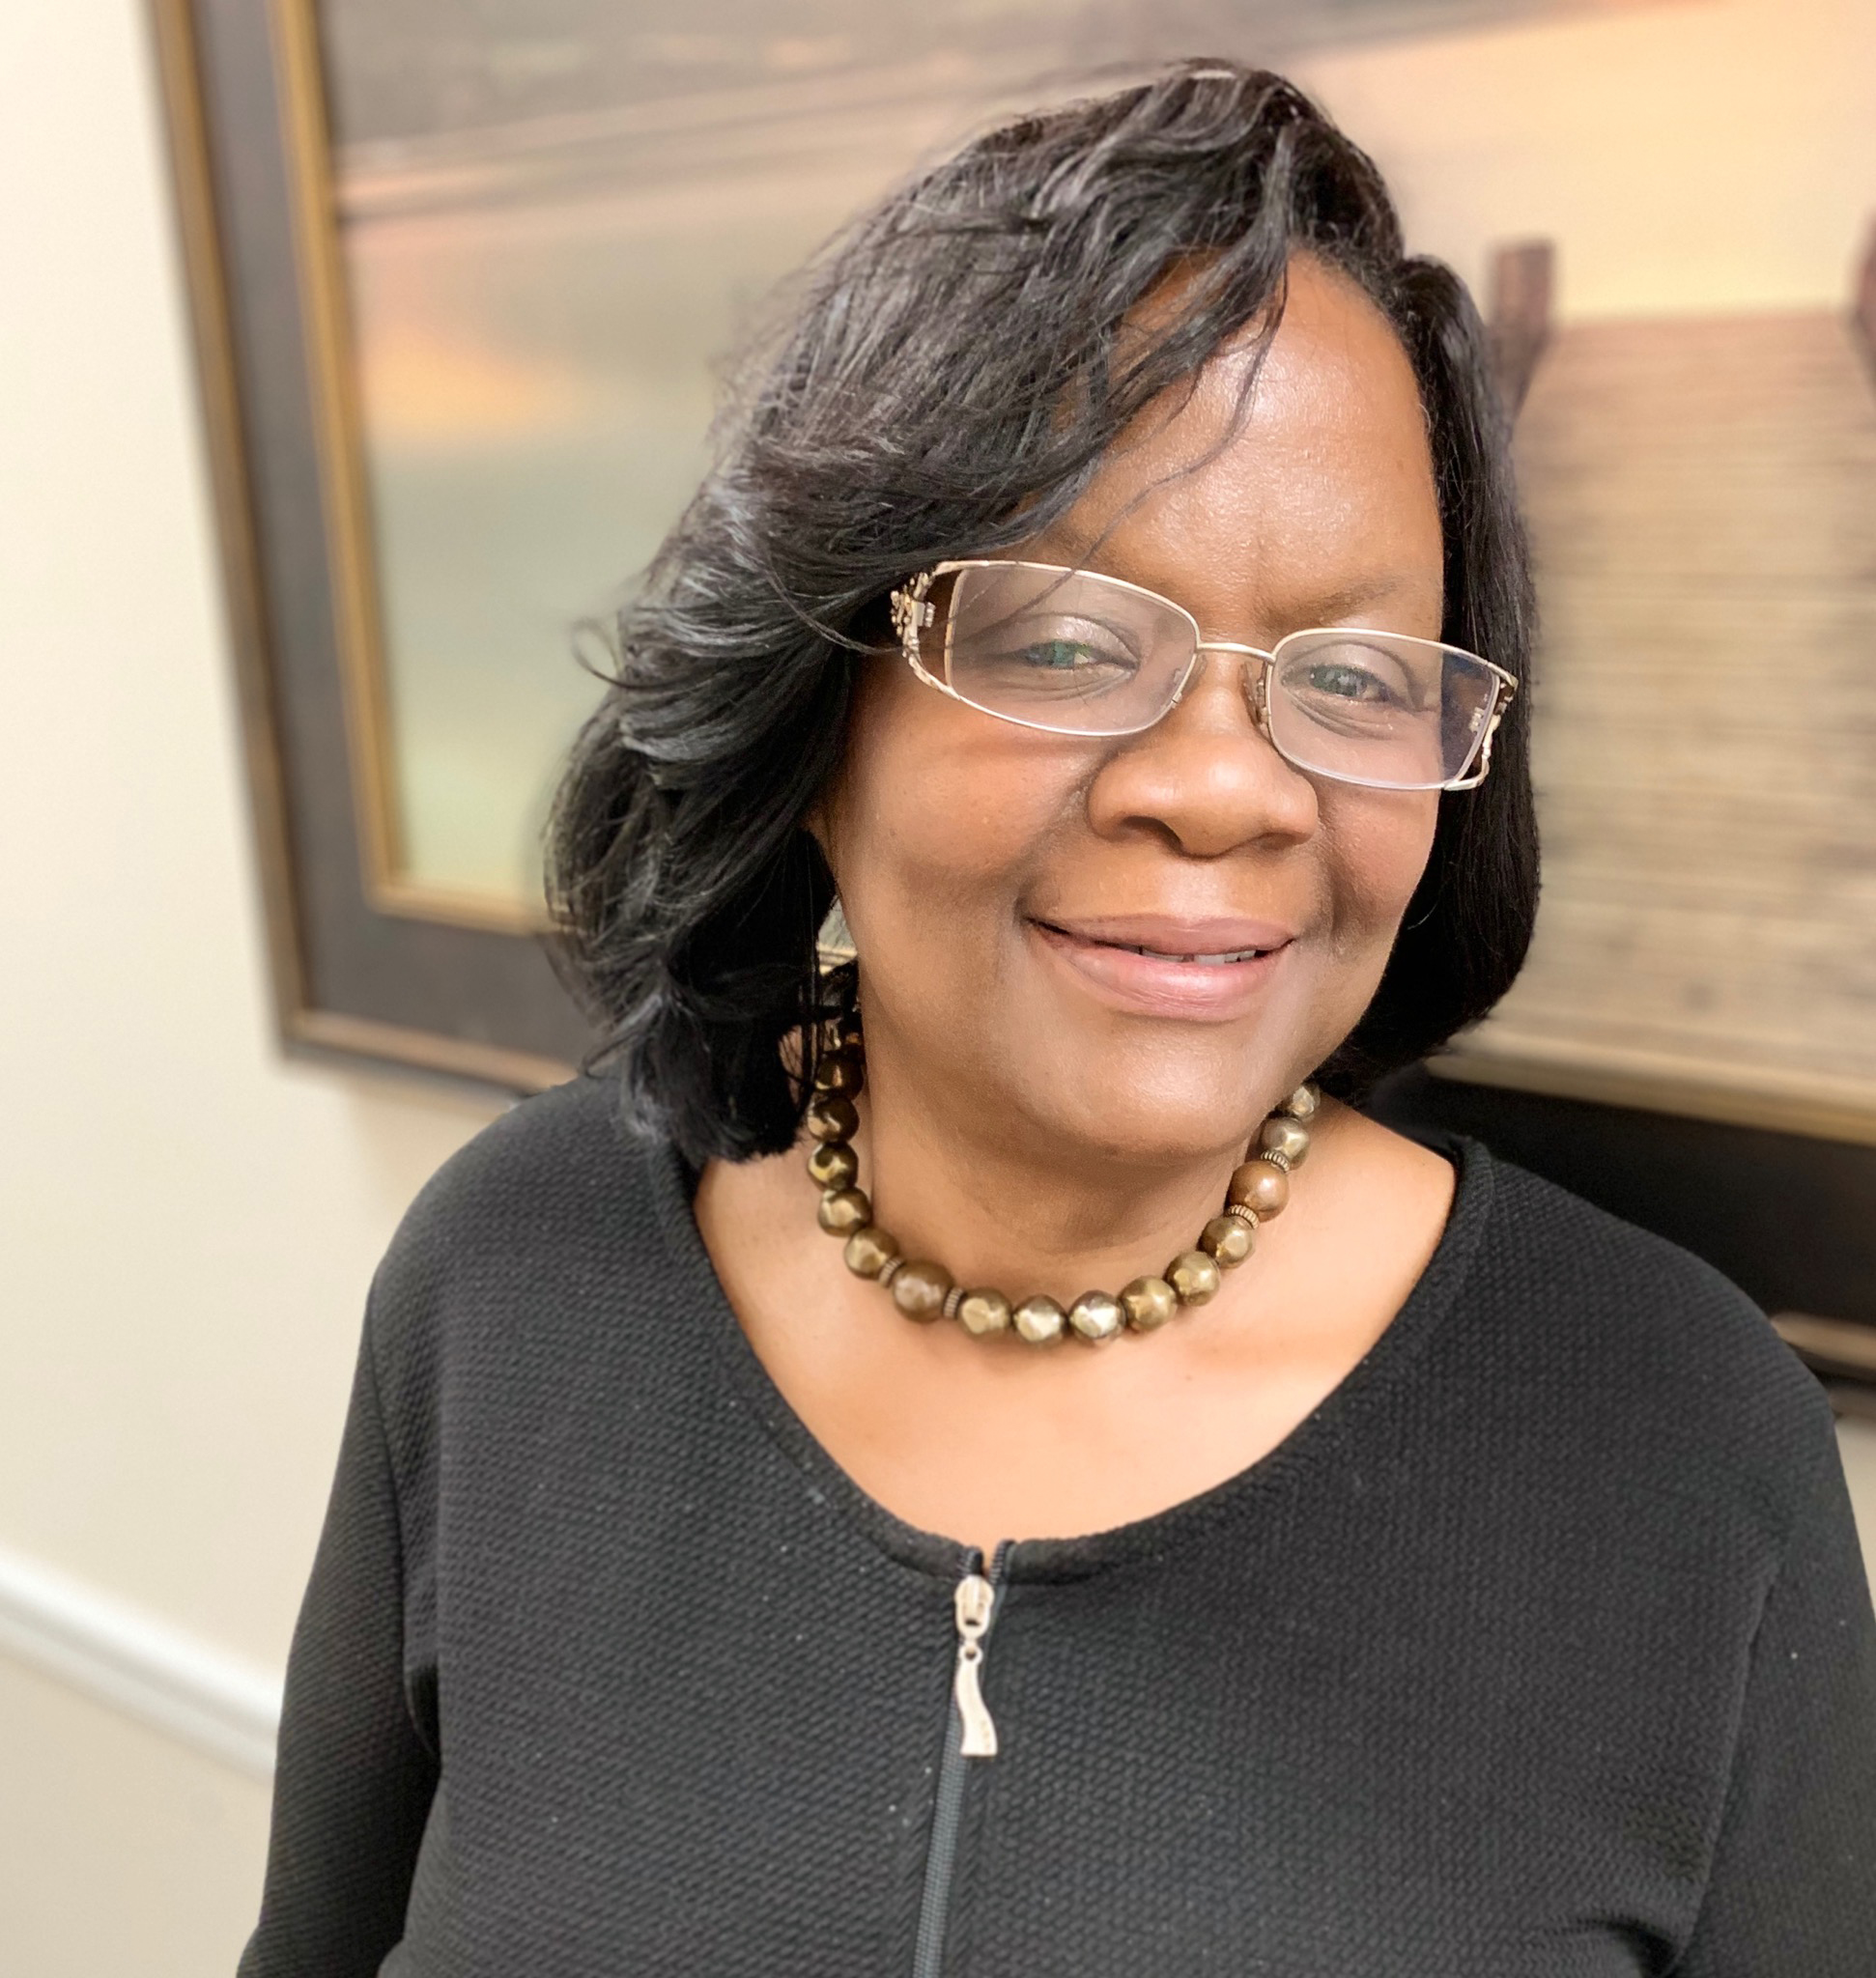 National Disability Provider Association Names Carla Garrison-Greene as Recipient of 2020 Georgia DSP of the Year Award